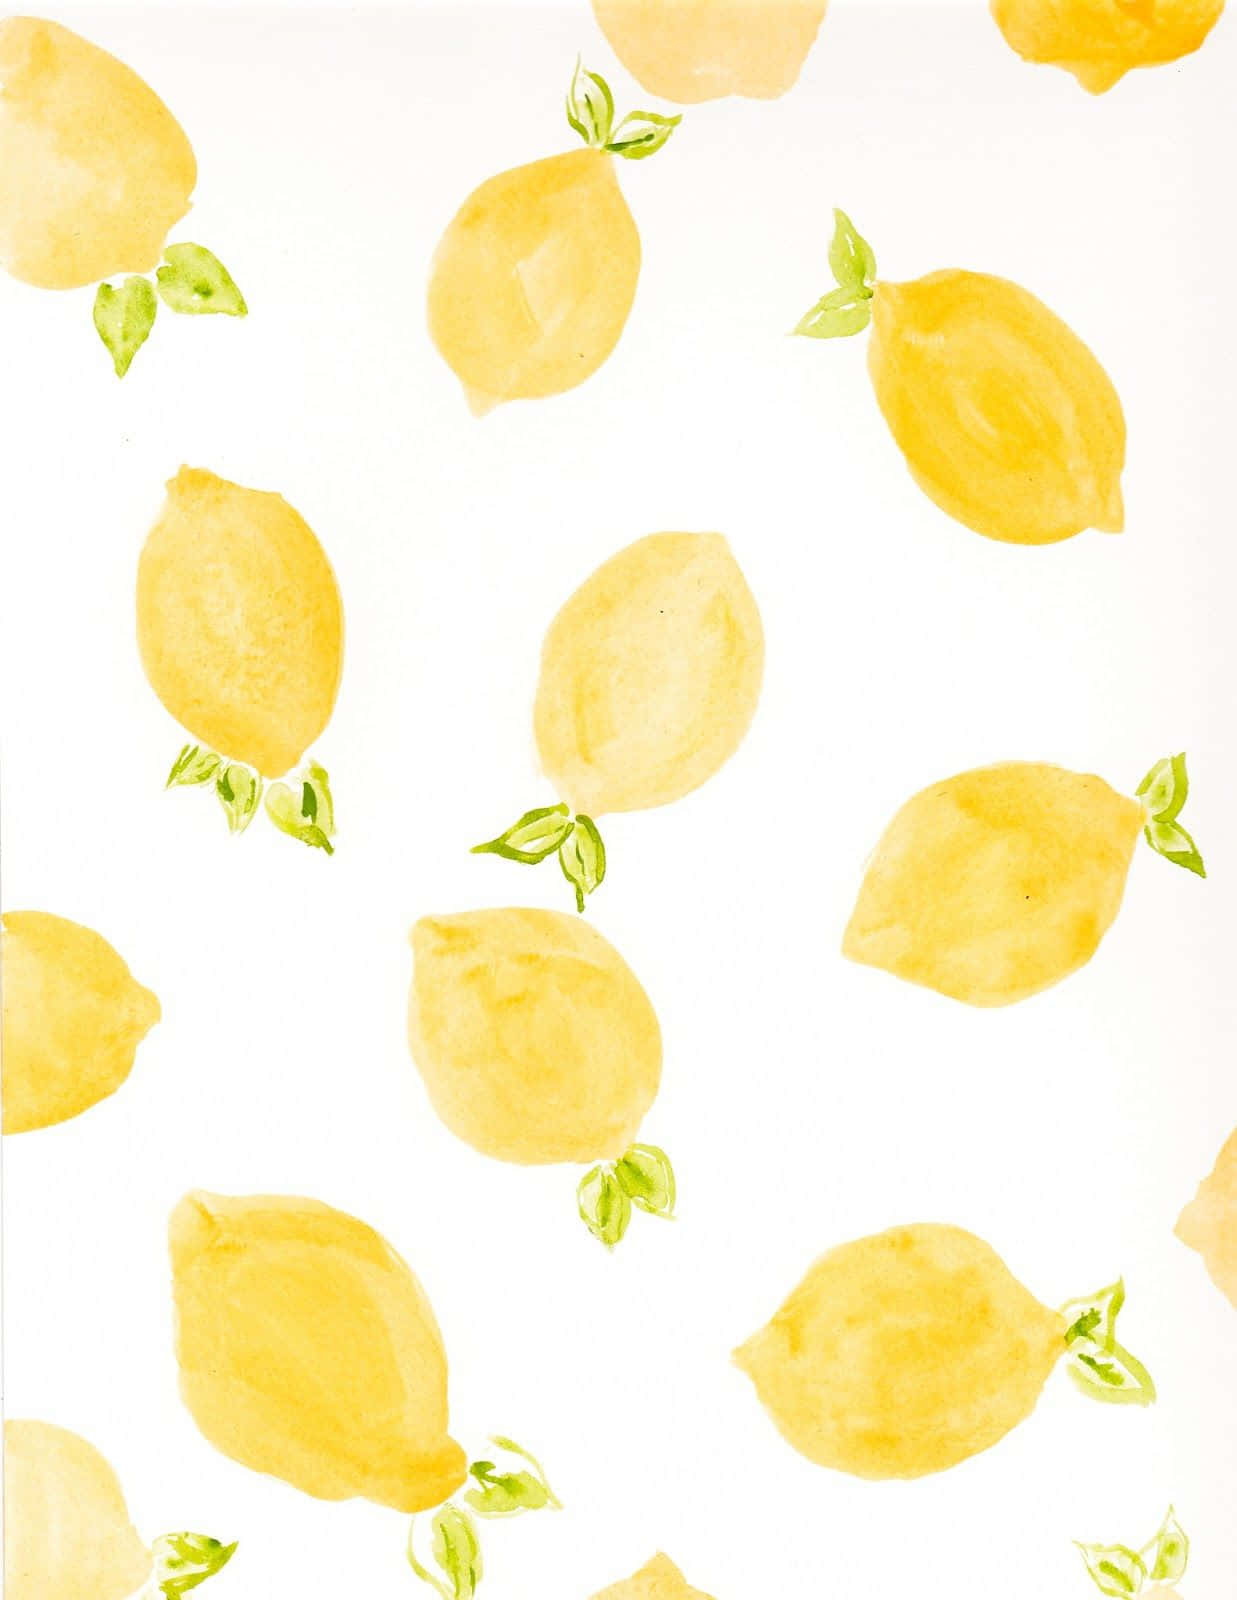 Bring a little brightness into your day with this Aesthetic Lemon! Wallpaper